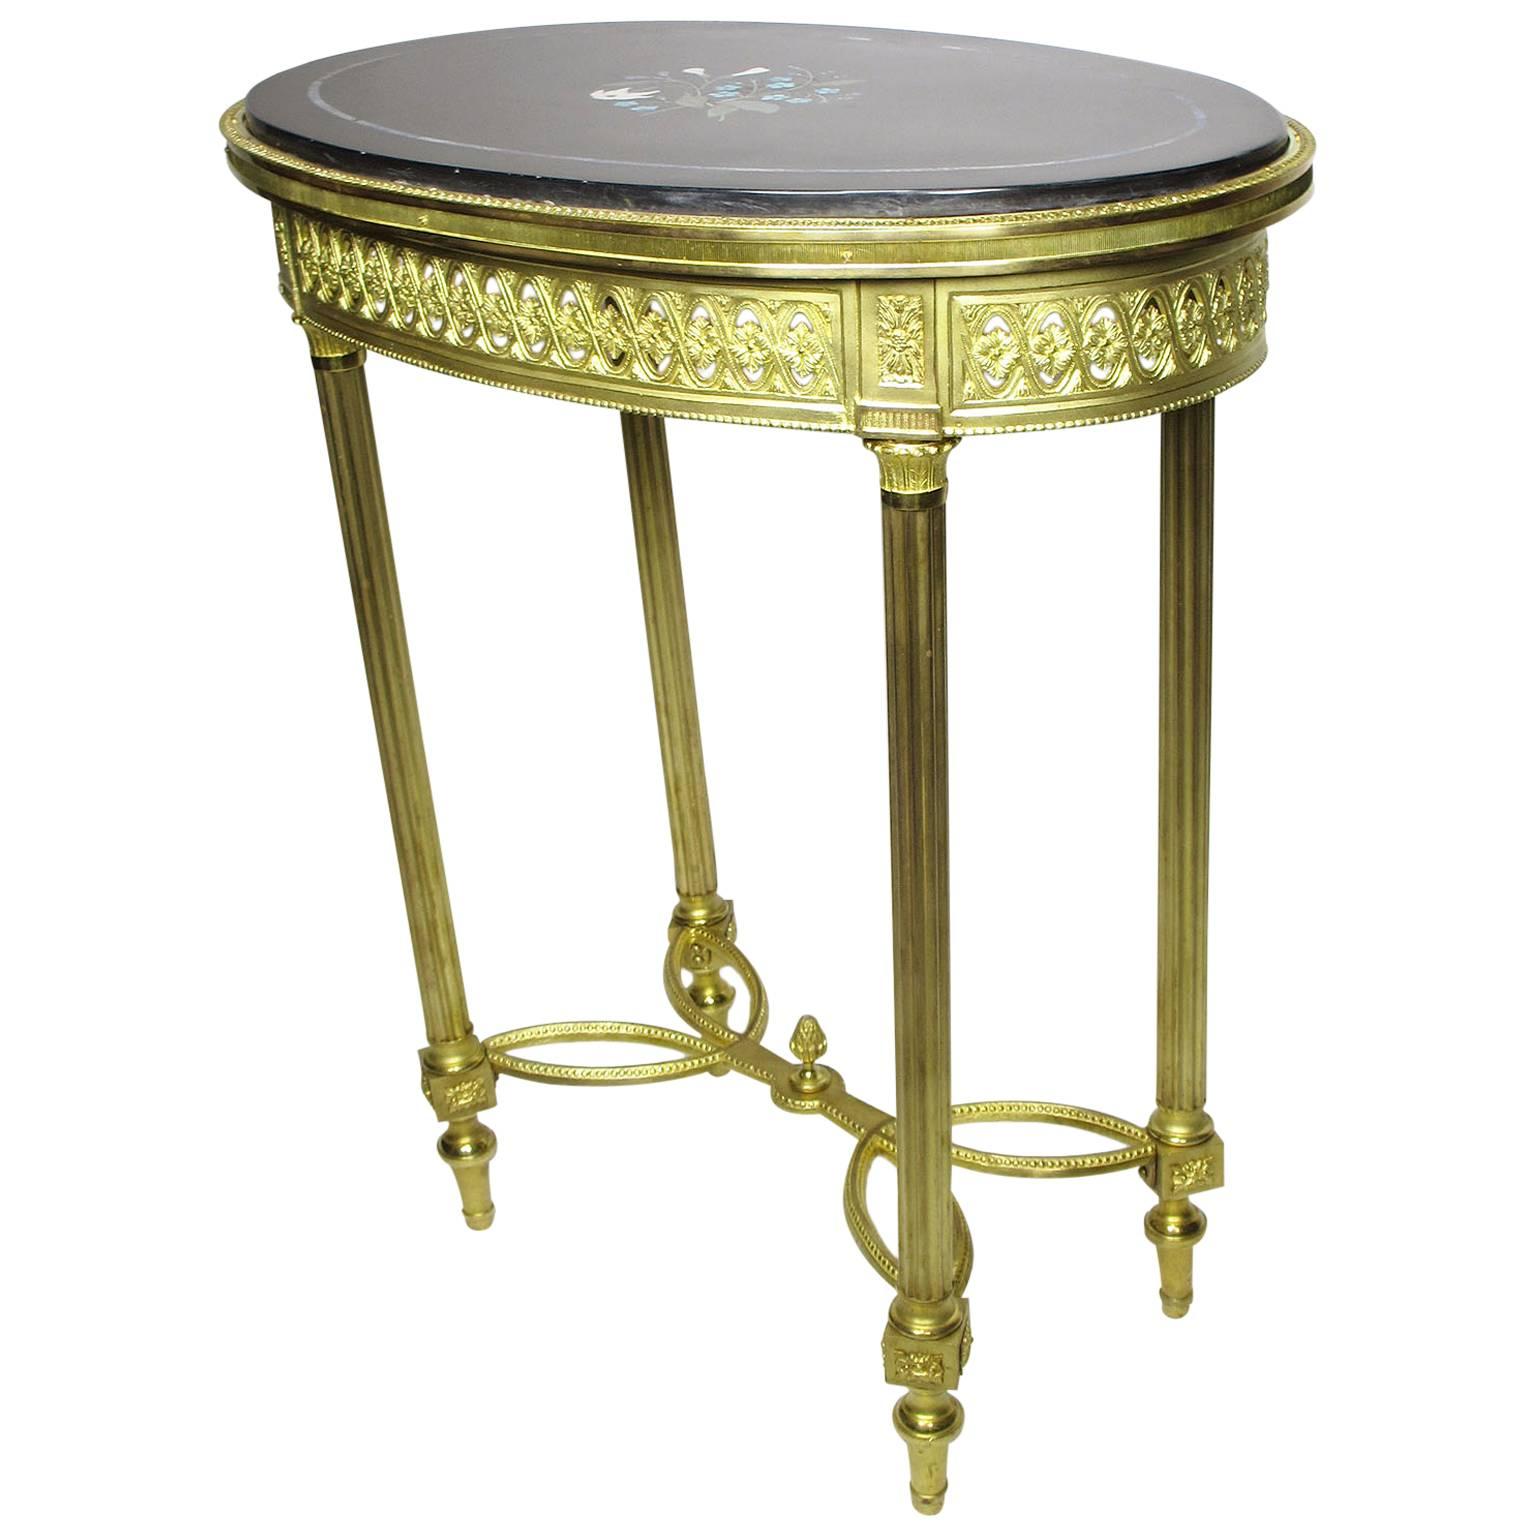 French 19th-20th Century Louis XVI Style Gilt Bronze and Pietra Dura Side Table